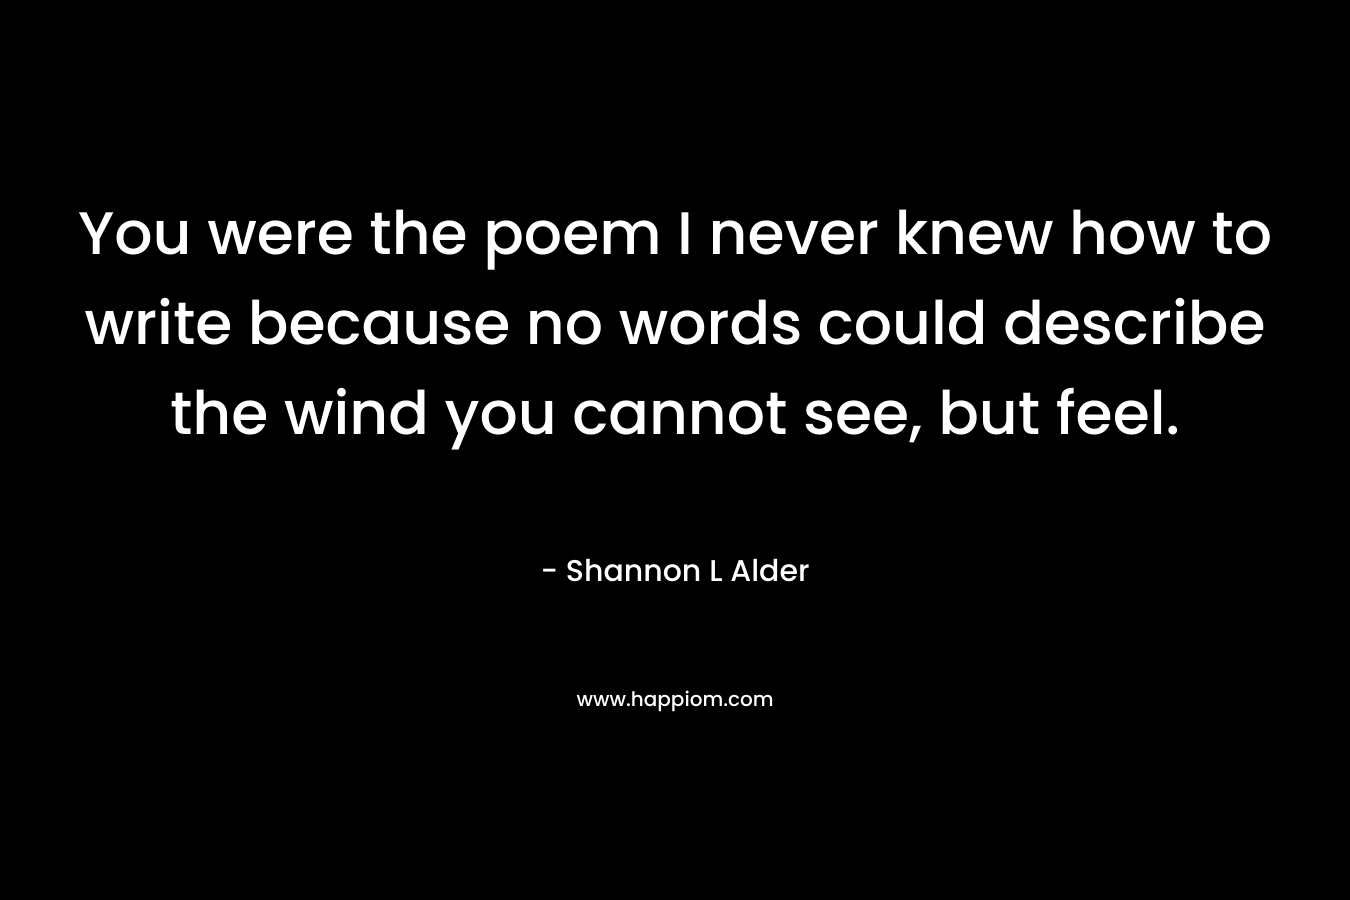 You were the poem I never knew how to write because no words could describe the wind you cannot see, but feel.